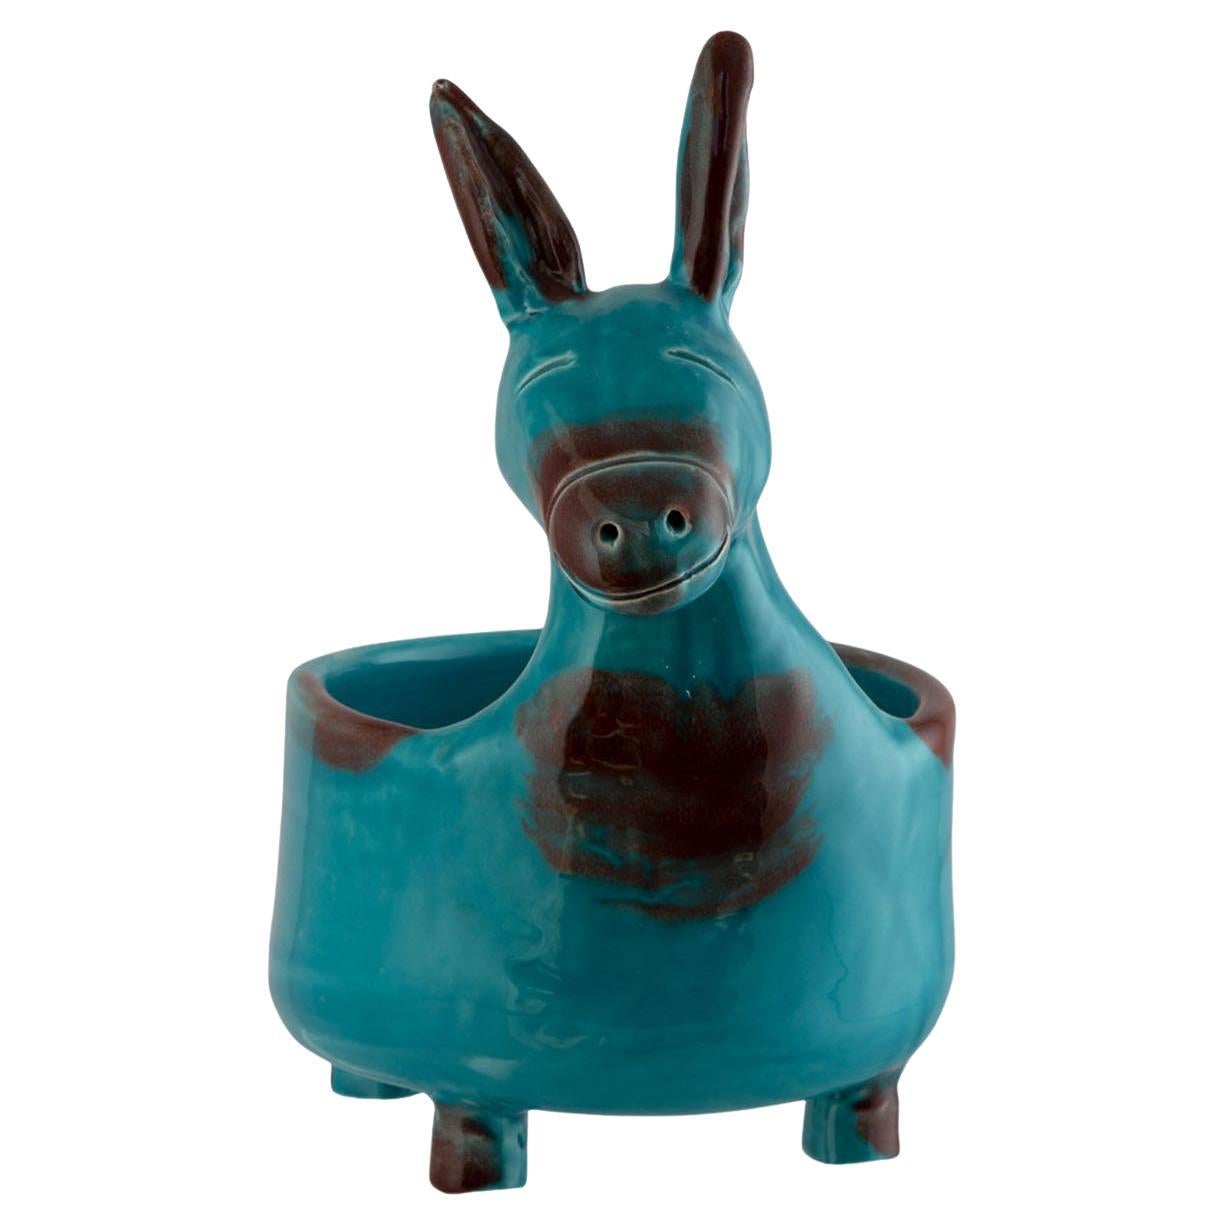 The Little Donkey Vases For Sale